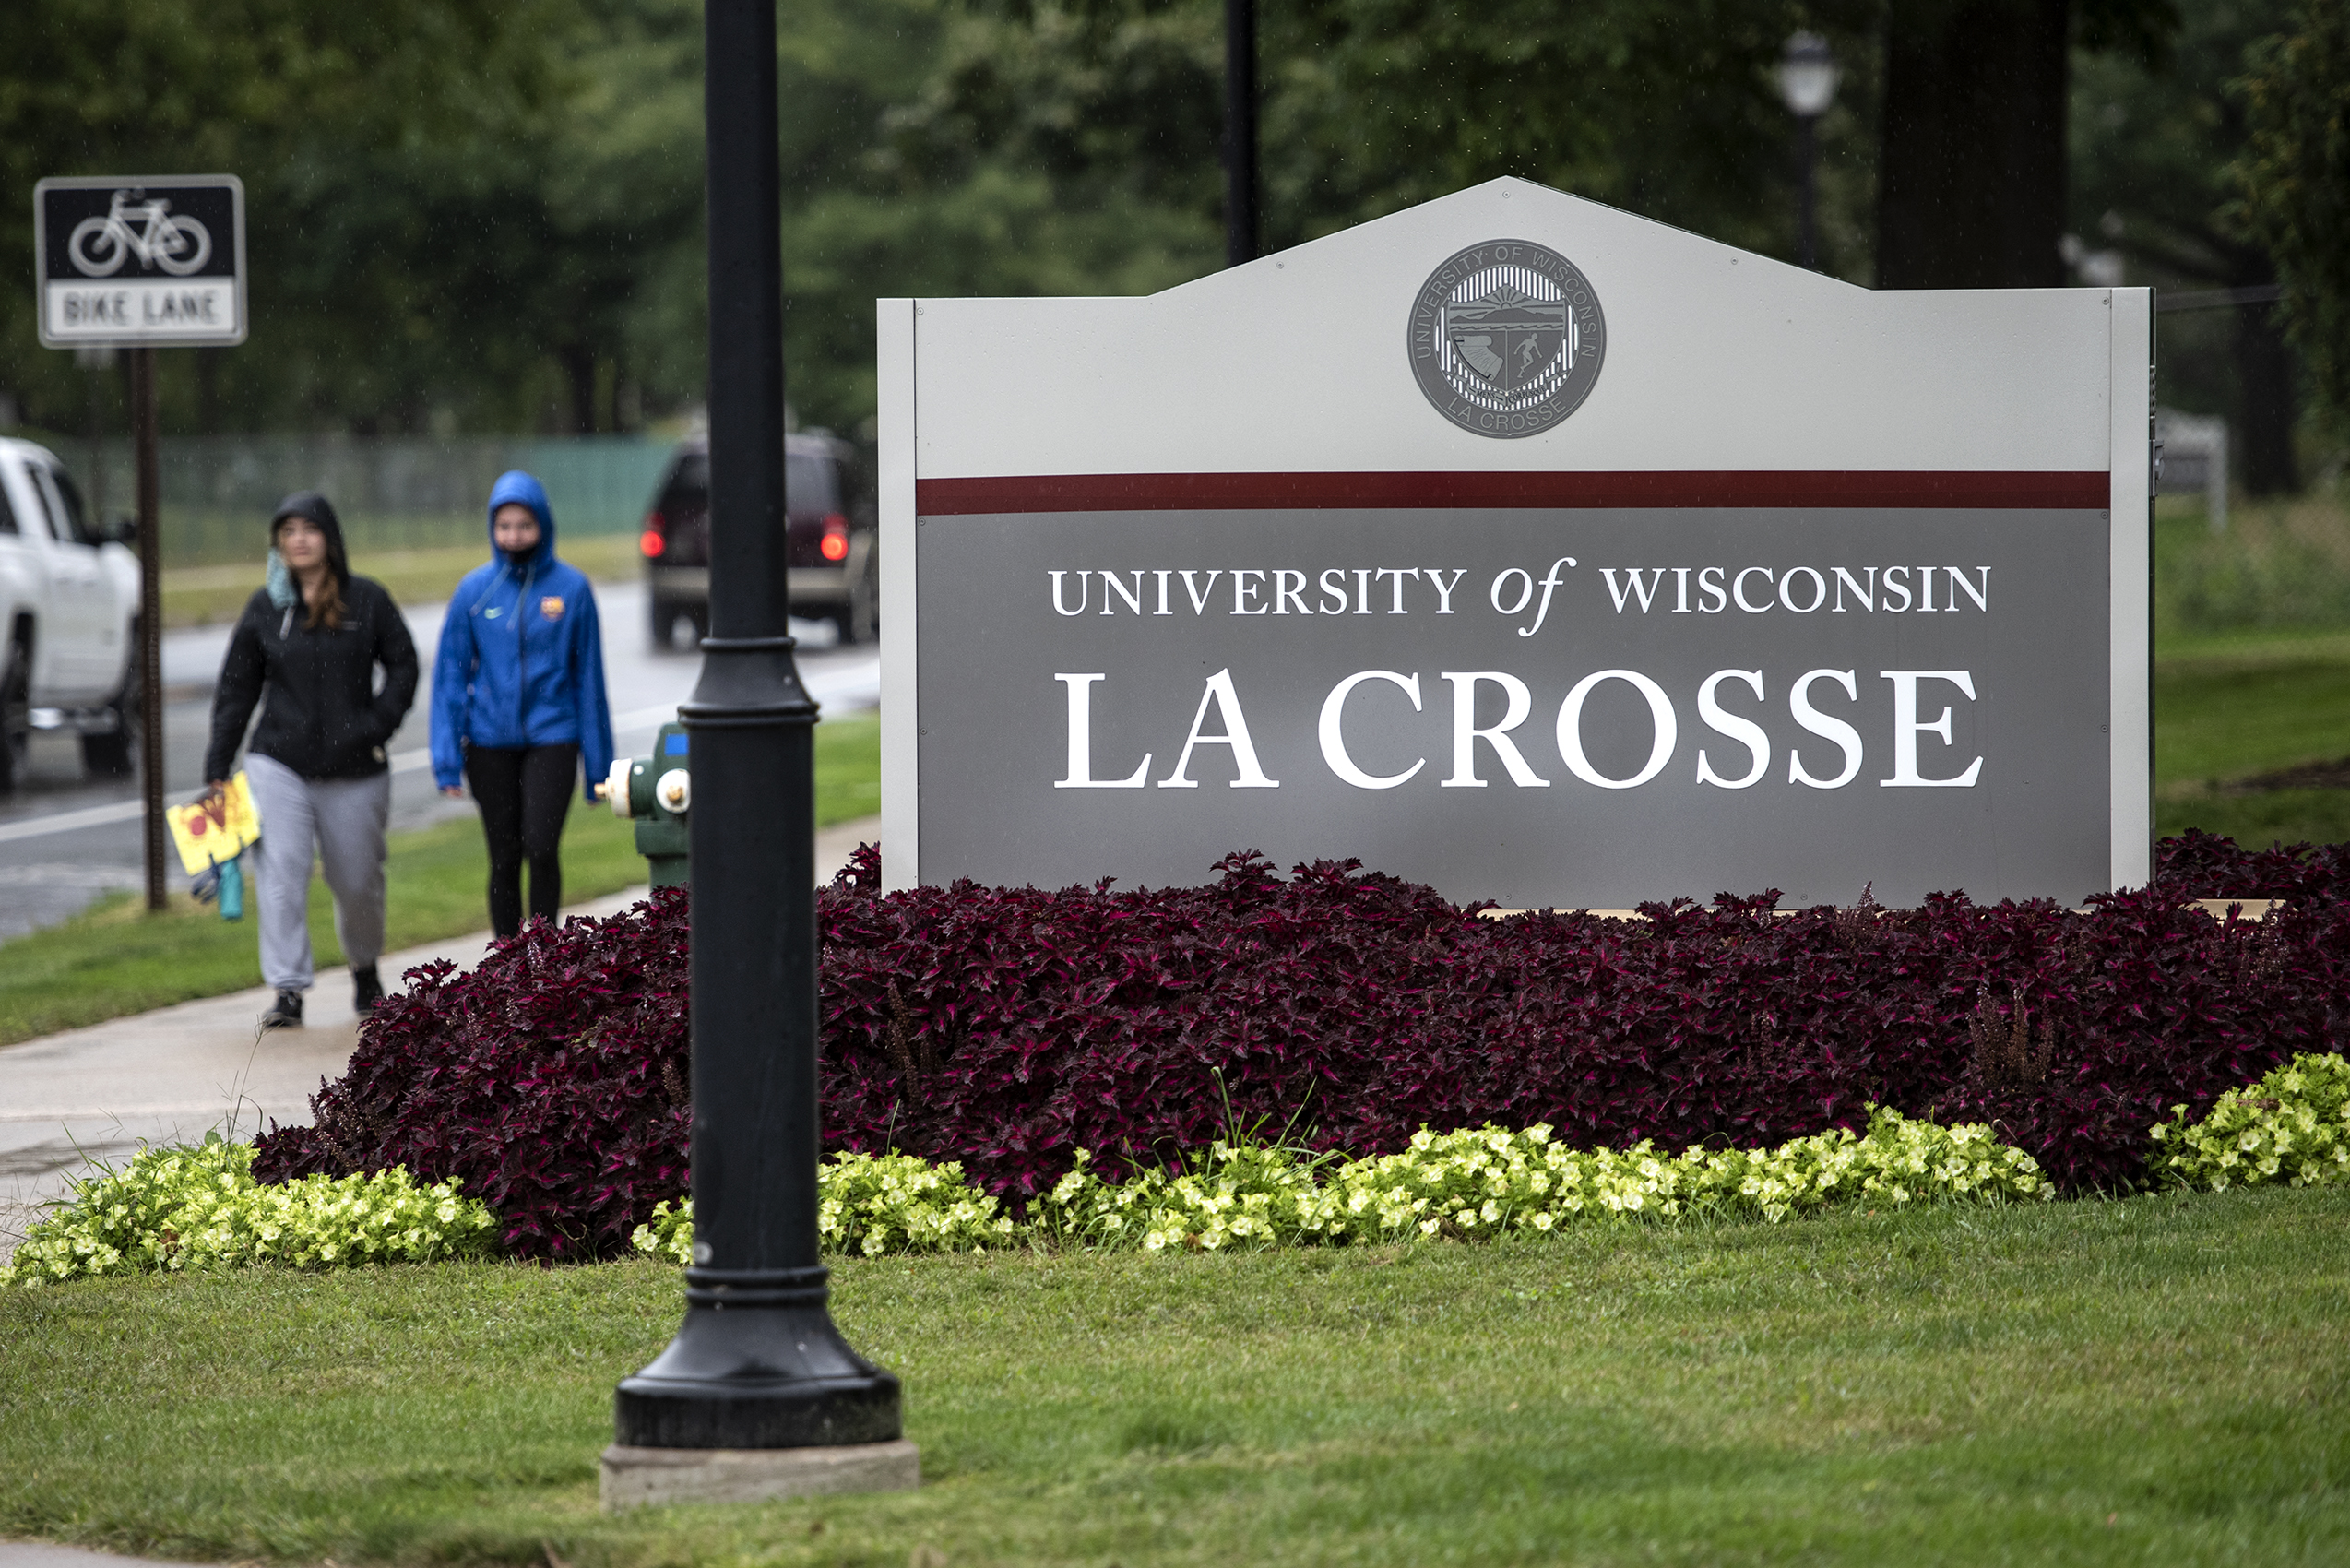 People walk by a sign that says "University of Wisconsin La Crosse"